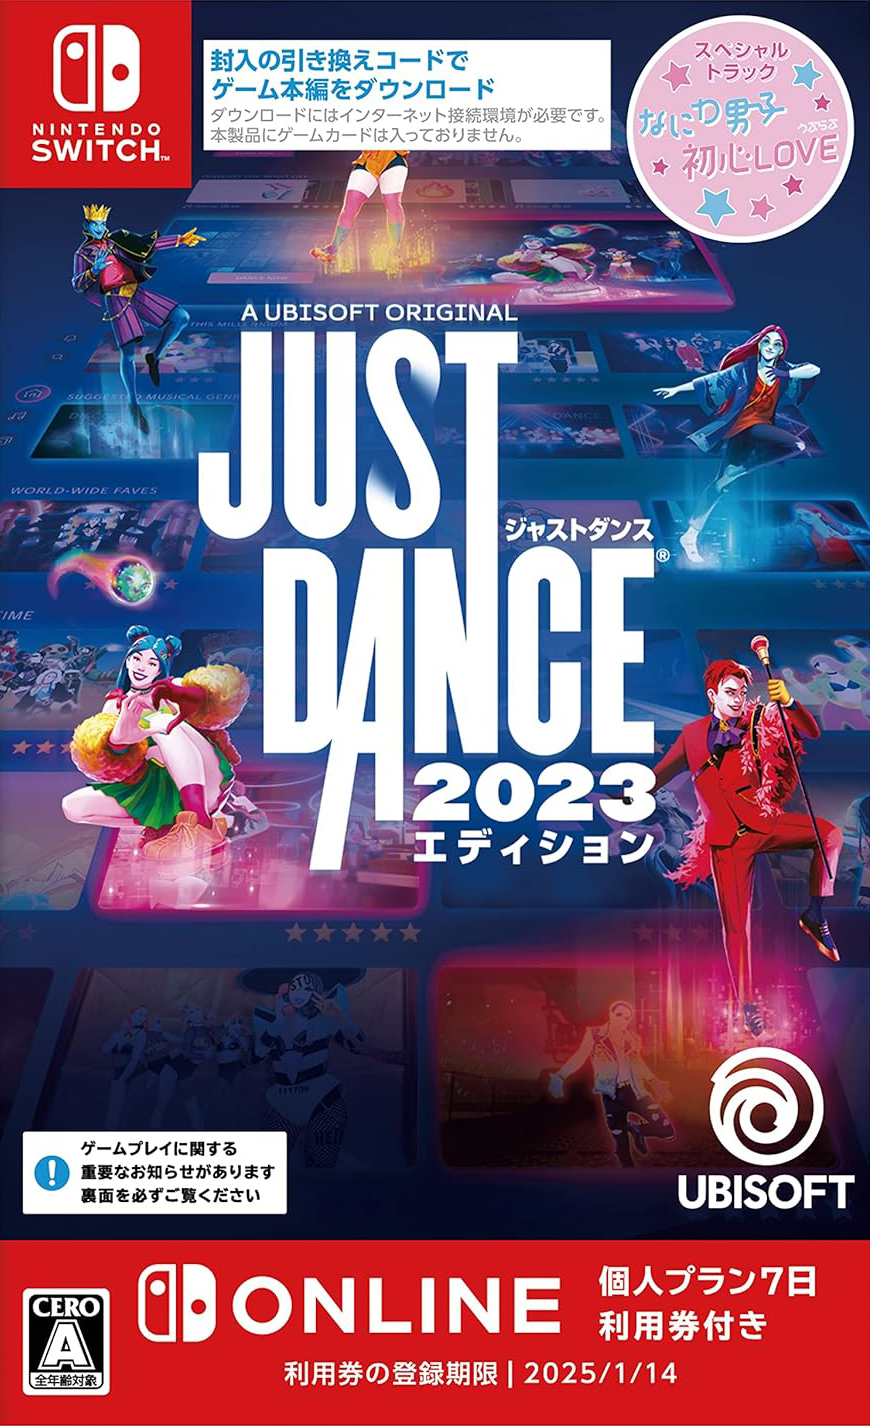 Just Dance 2023 Edition - Playstation 5 (Code in Box) 